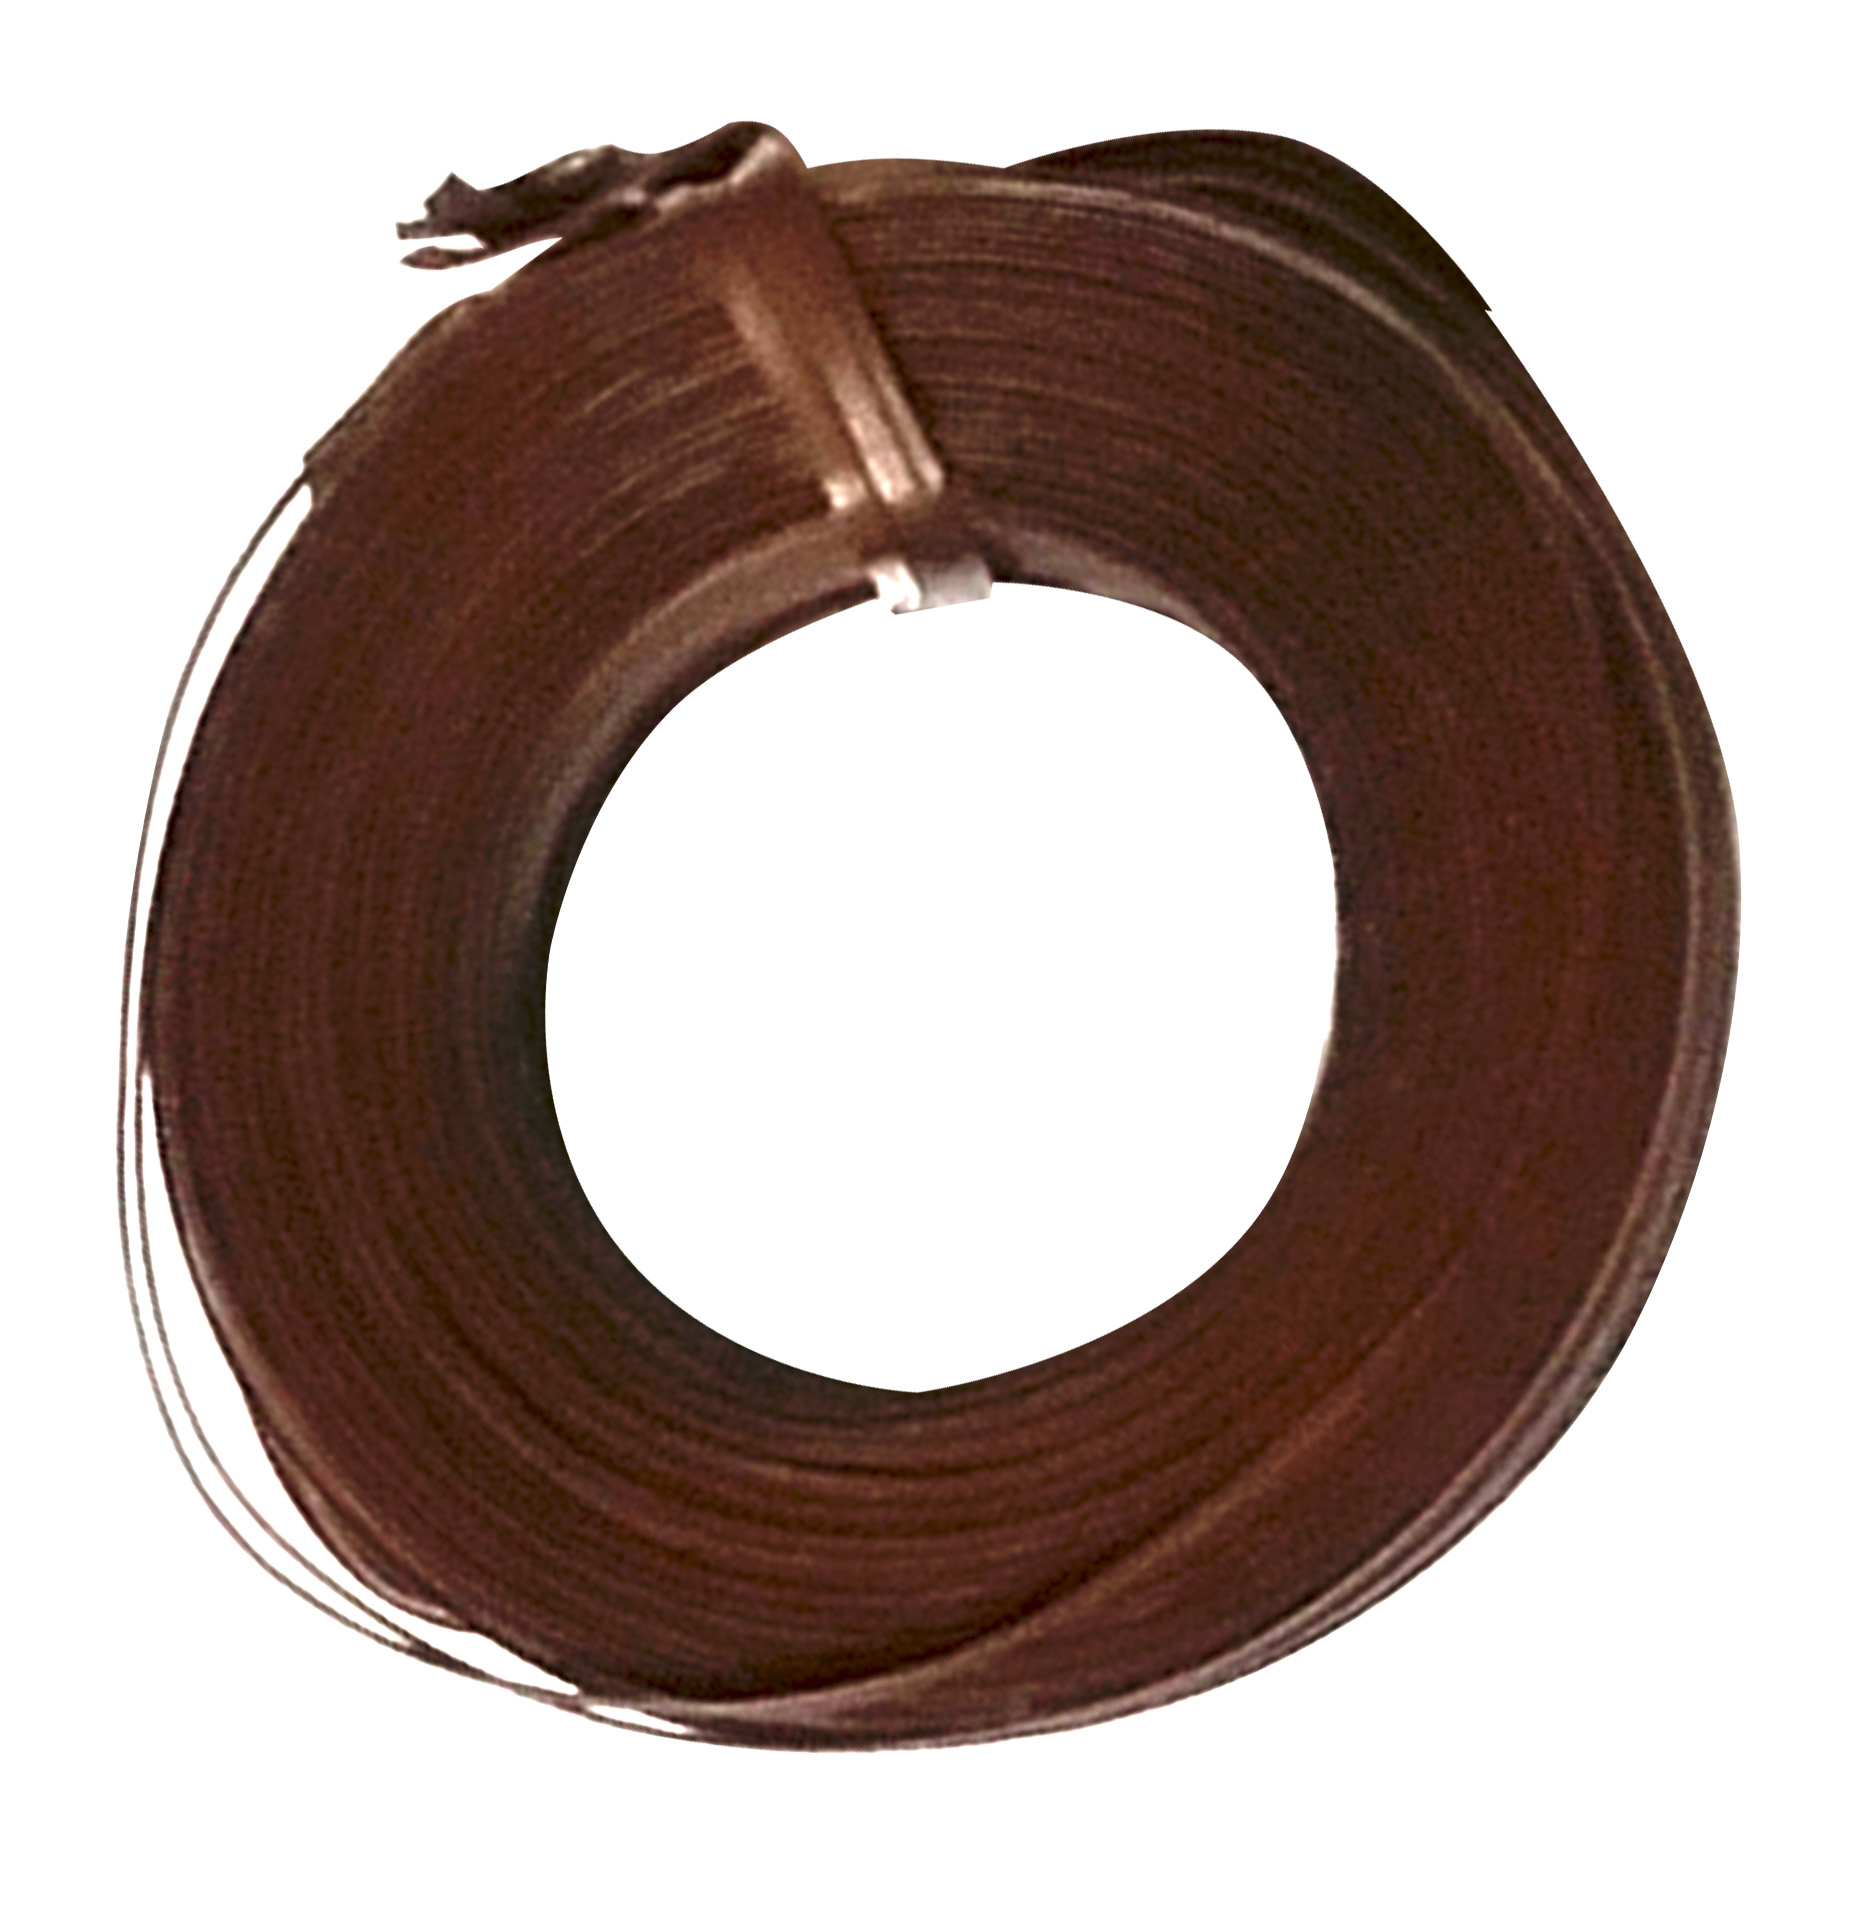 Zenport Electric Plant Tying Tool Tie Wire ET1-WIRE1 295-Feet Brown PVC Covered Twist Tie Wire